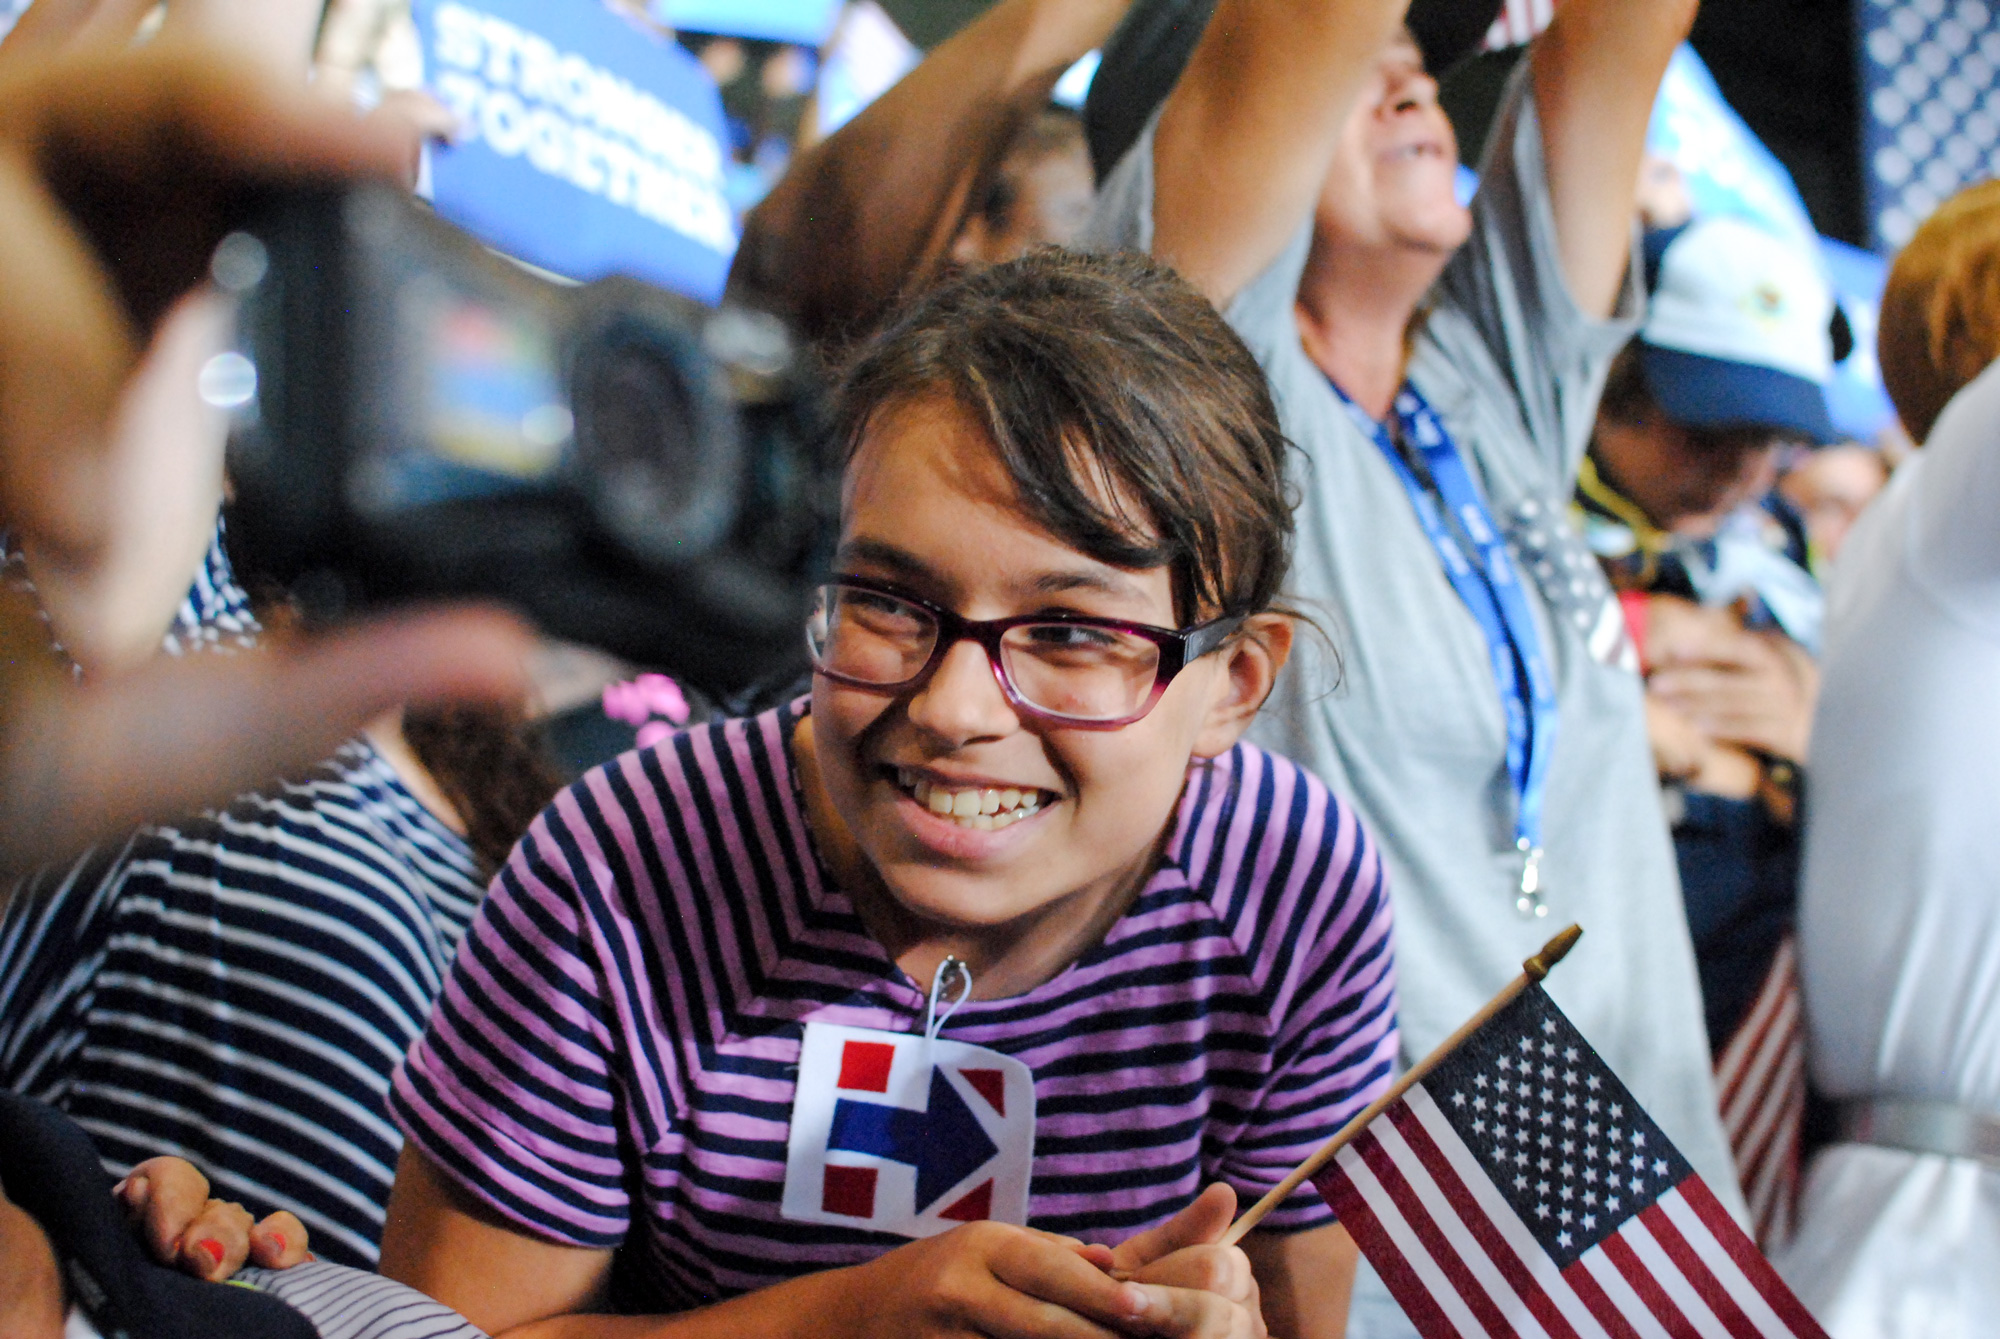 Stephen Cummings, Excited to see Hillary Clinton in Tampa, 2016